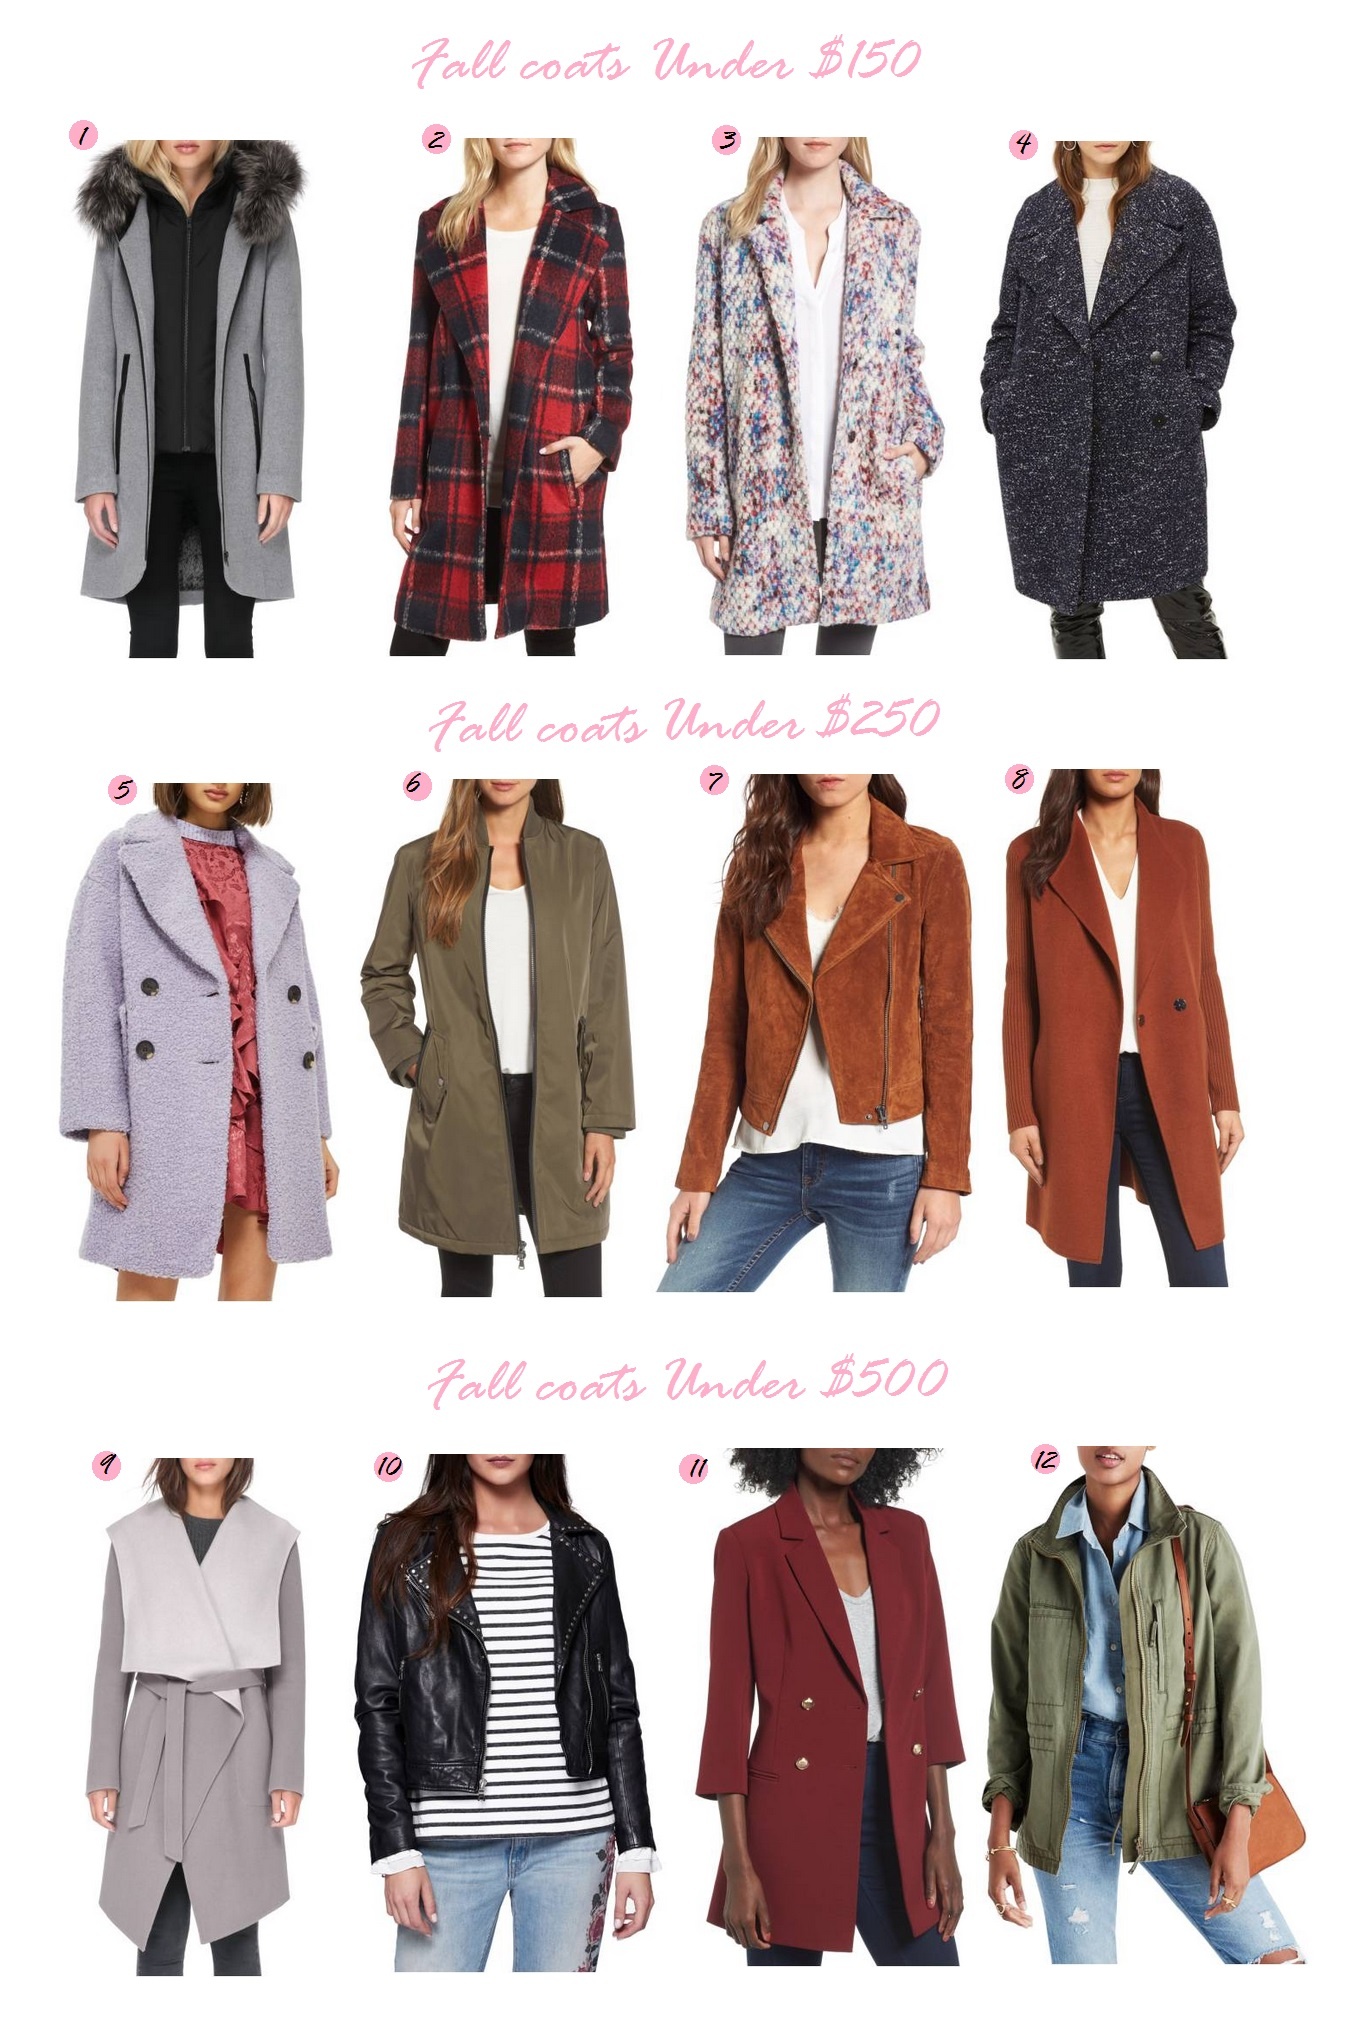 fall-coats-under-$100-what-would-v-wear-nordstrom